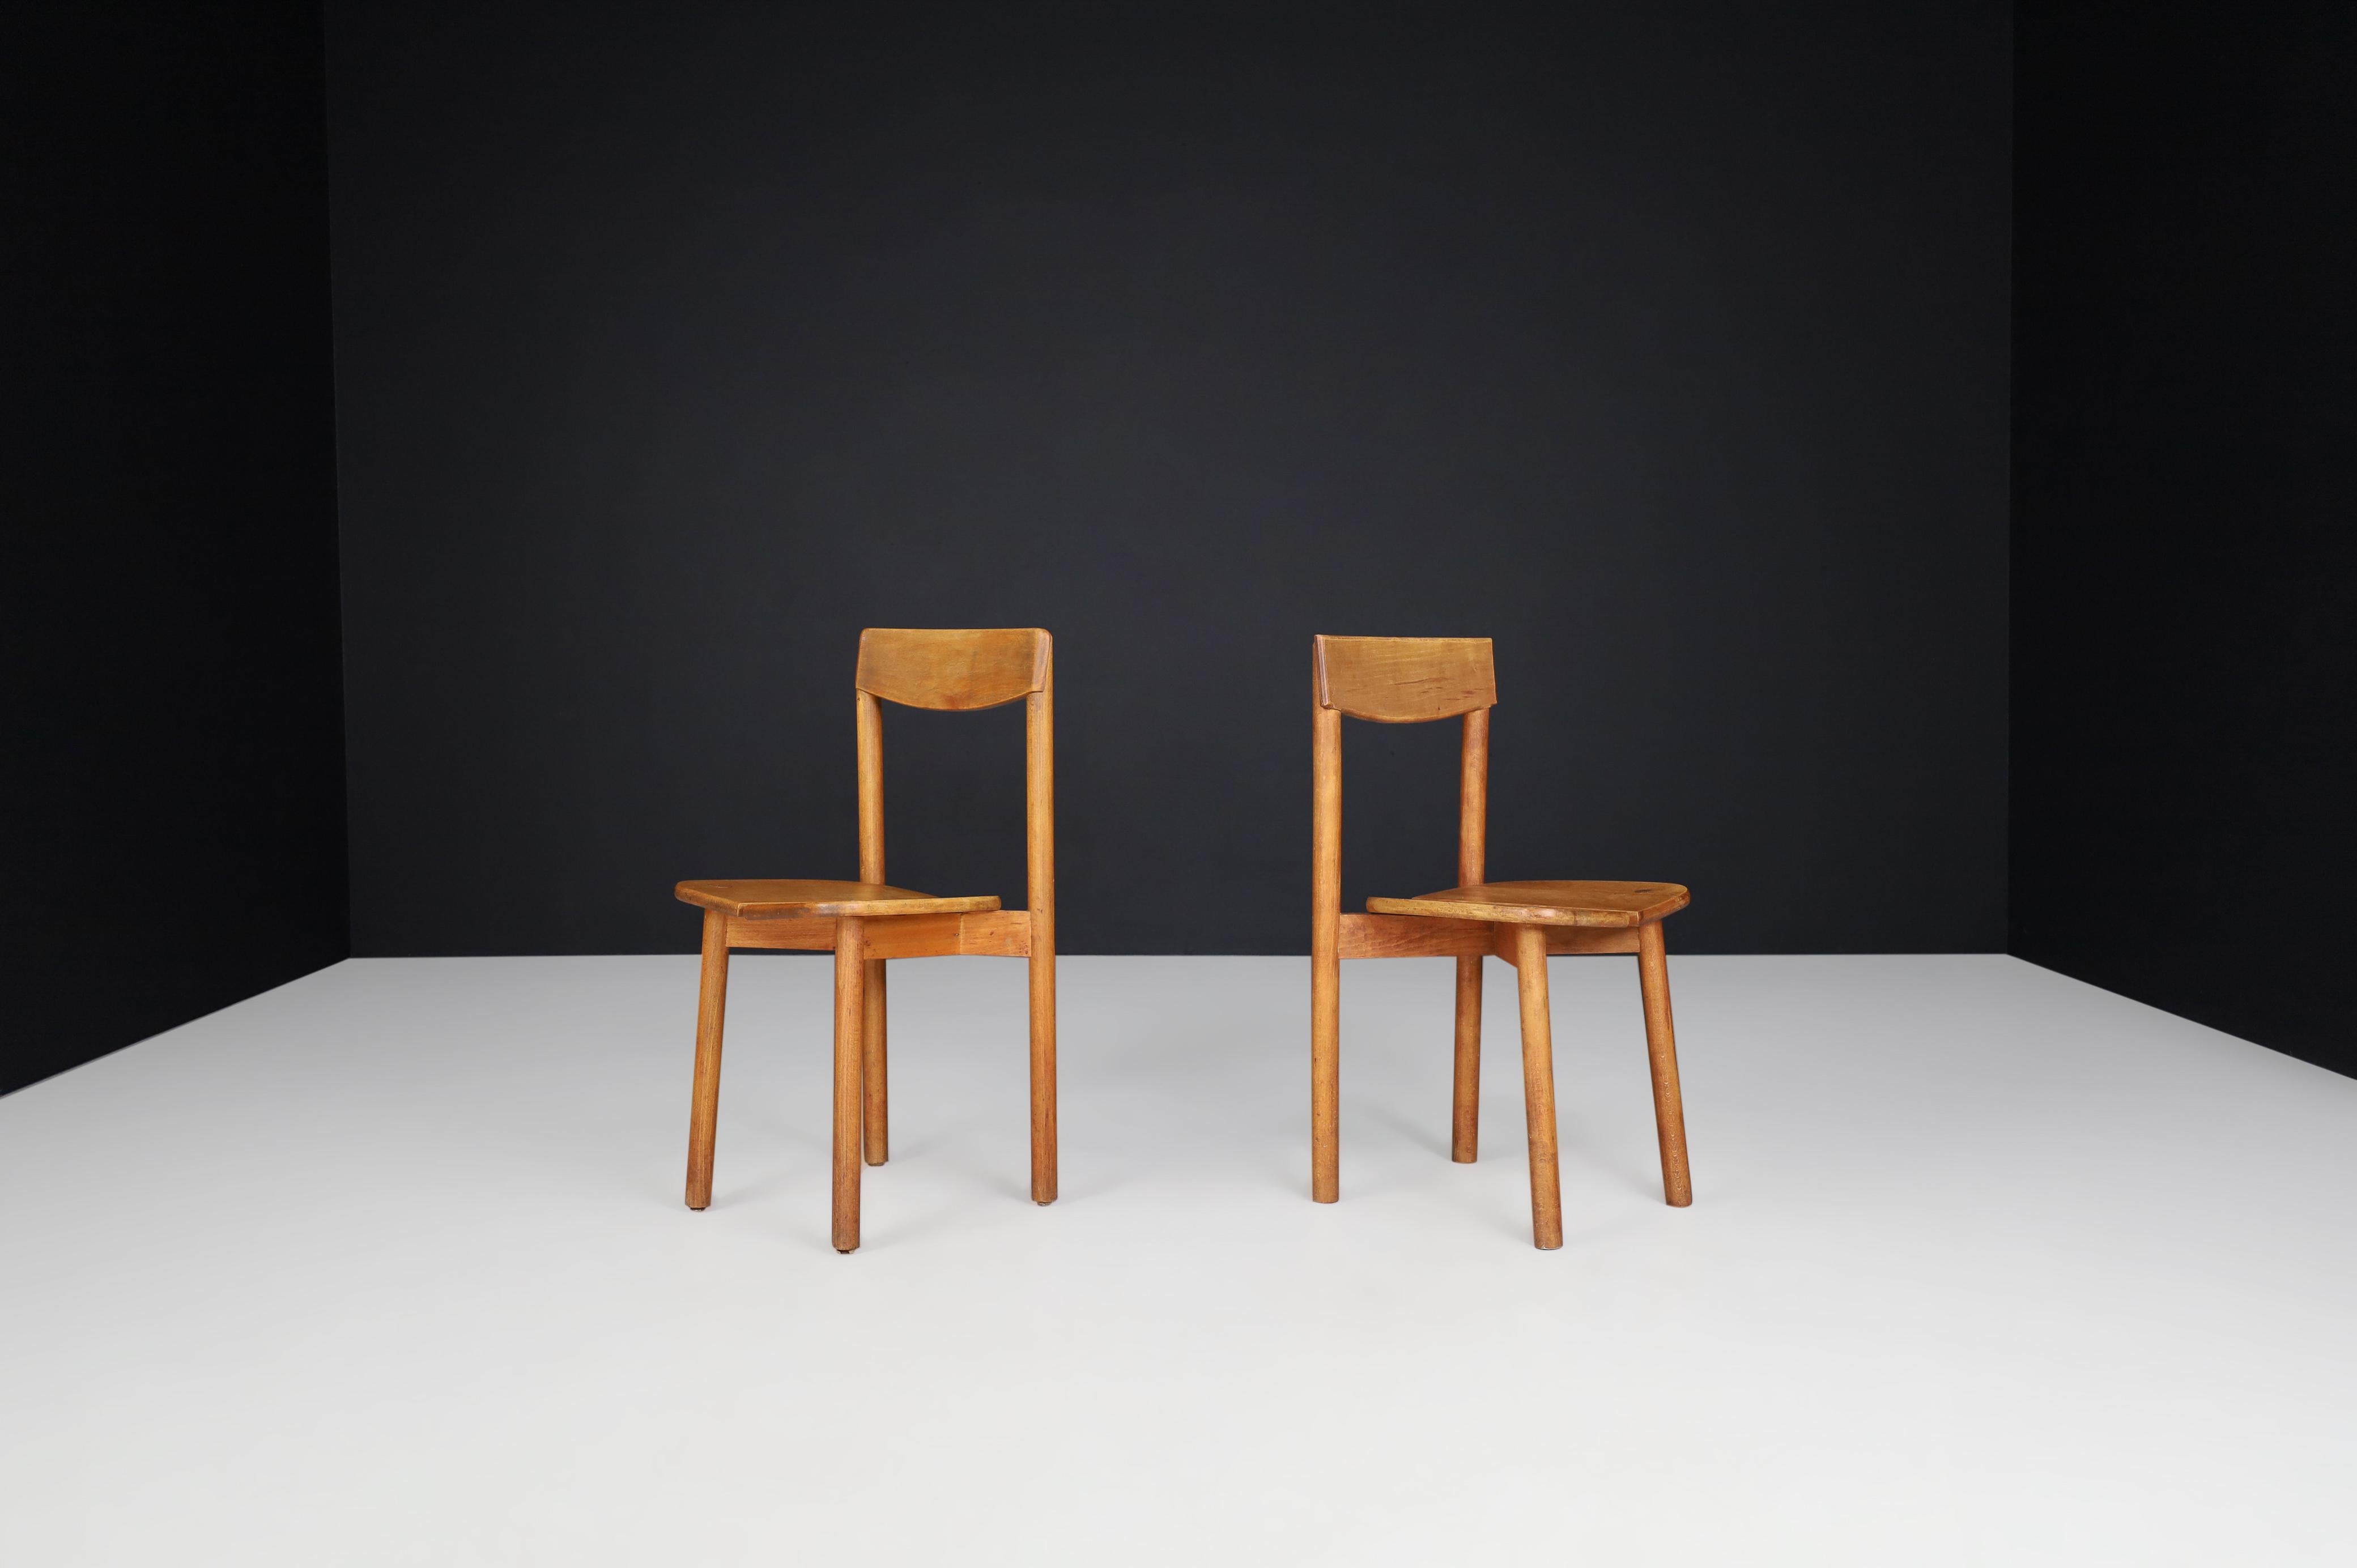 Pierre Gautier solid beech chairs, France, 1960s

Pierre Gautier designed these chairs in the 1960s. These subtle and modest chairs are executed in stained beechwood. Characteristics of these chairs are the nice fine-shaped cylindric legs and the